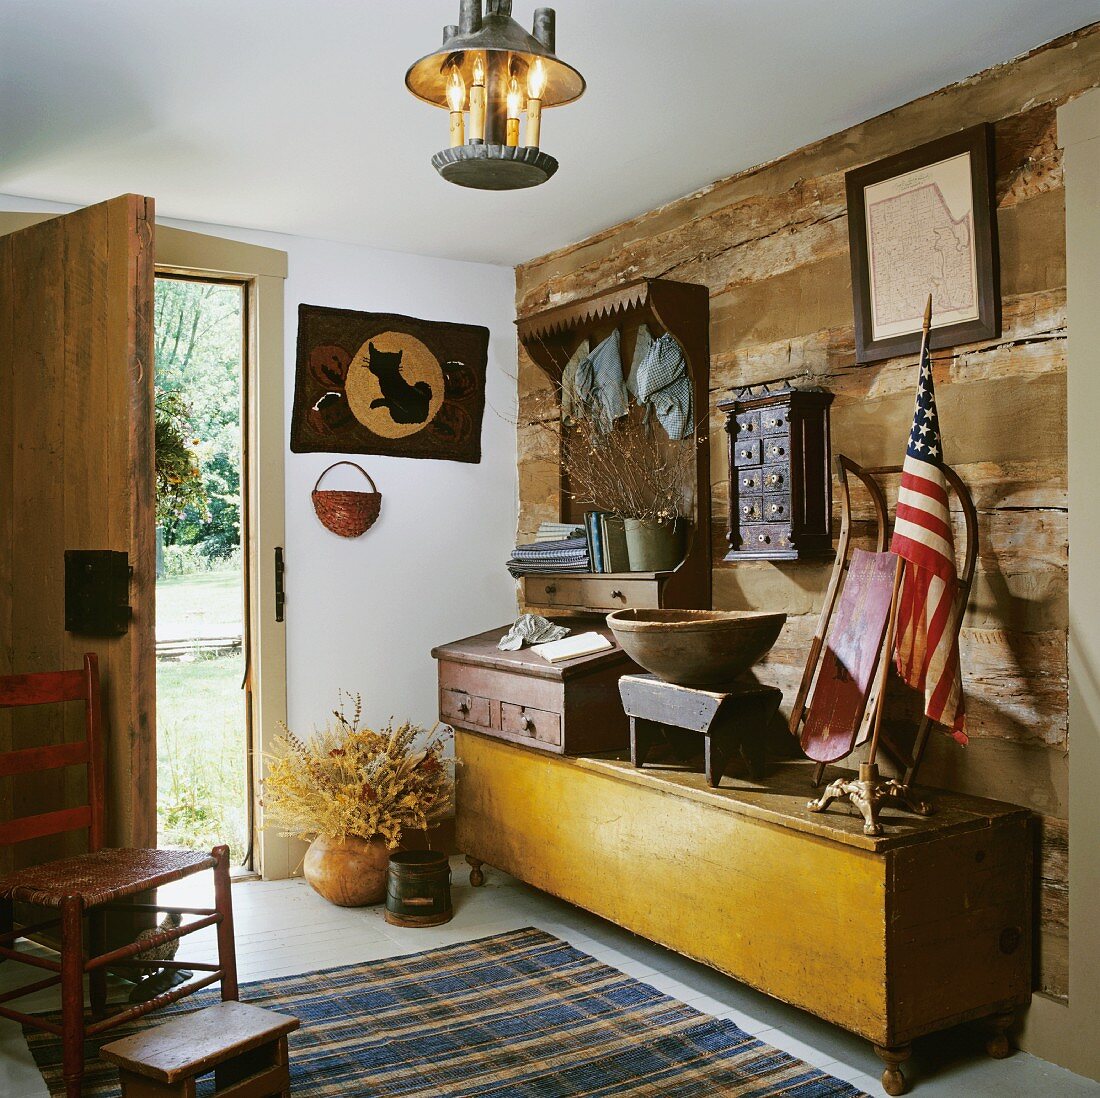 Hallway with rustic, log-cabin-style wooden wall, long wooden trunk and Post Revolutionary American antiquities